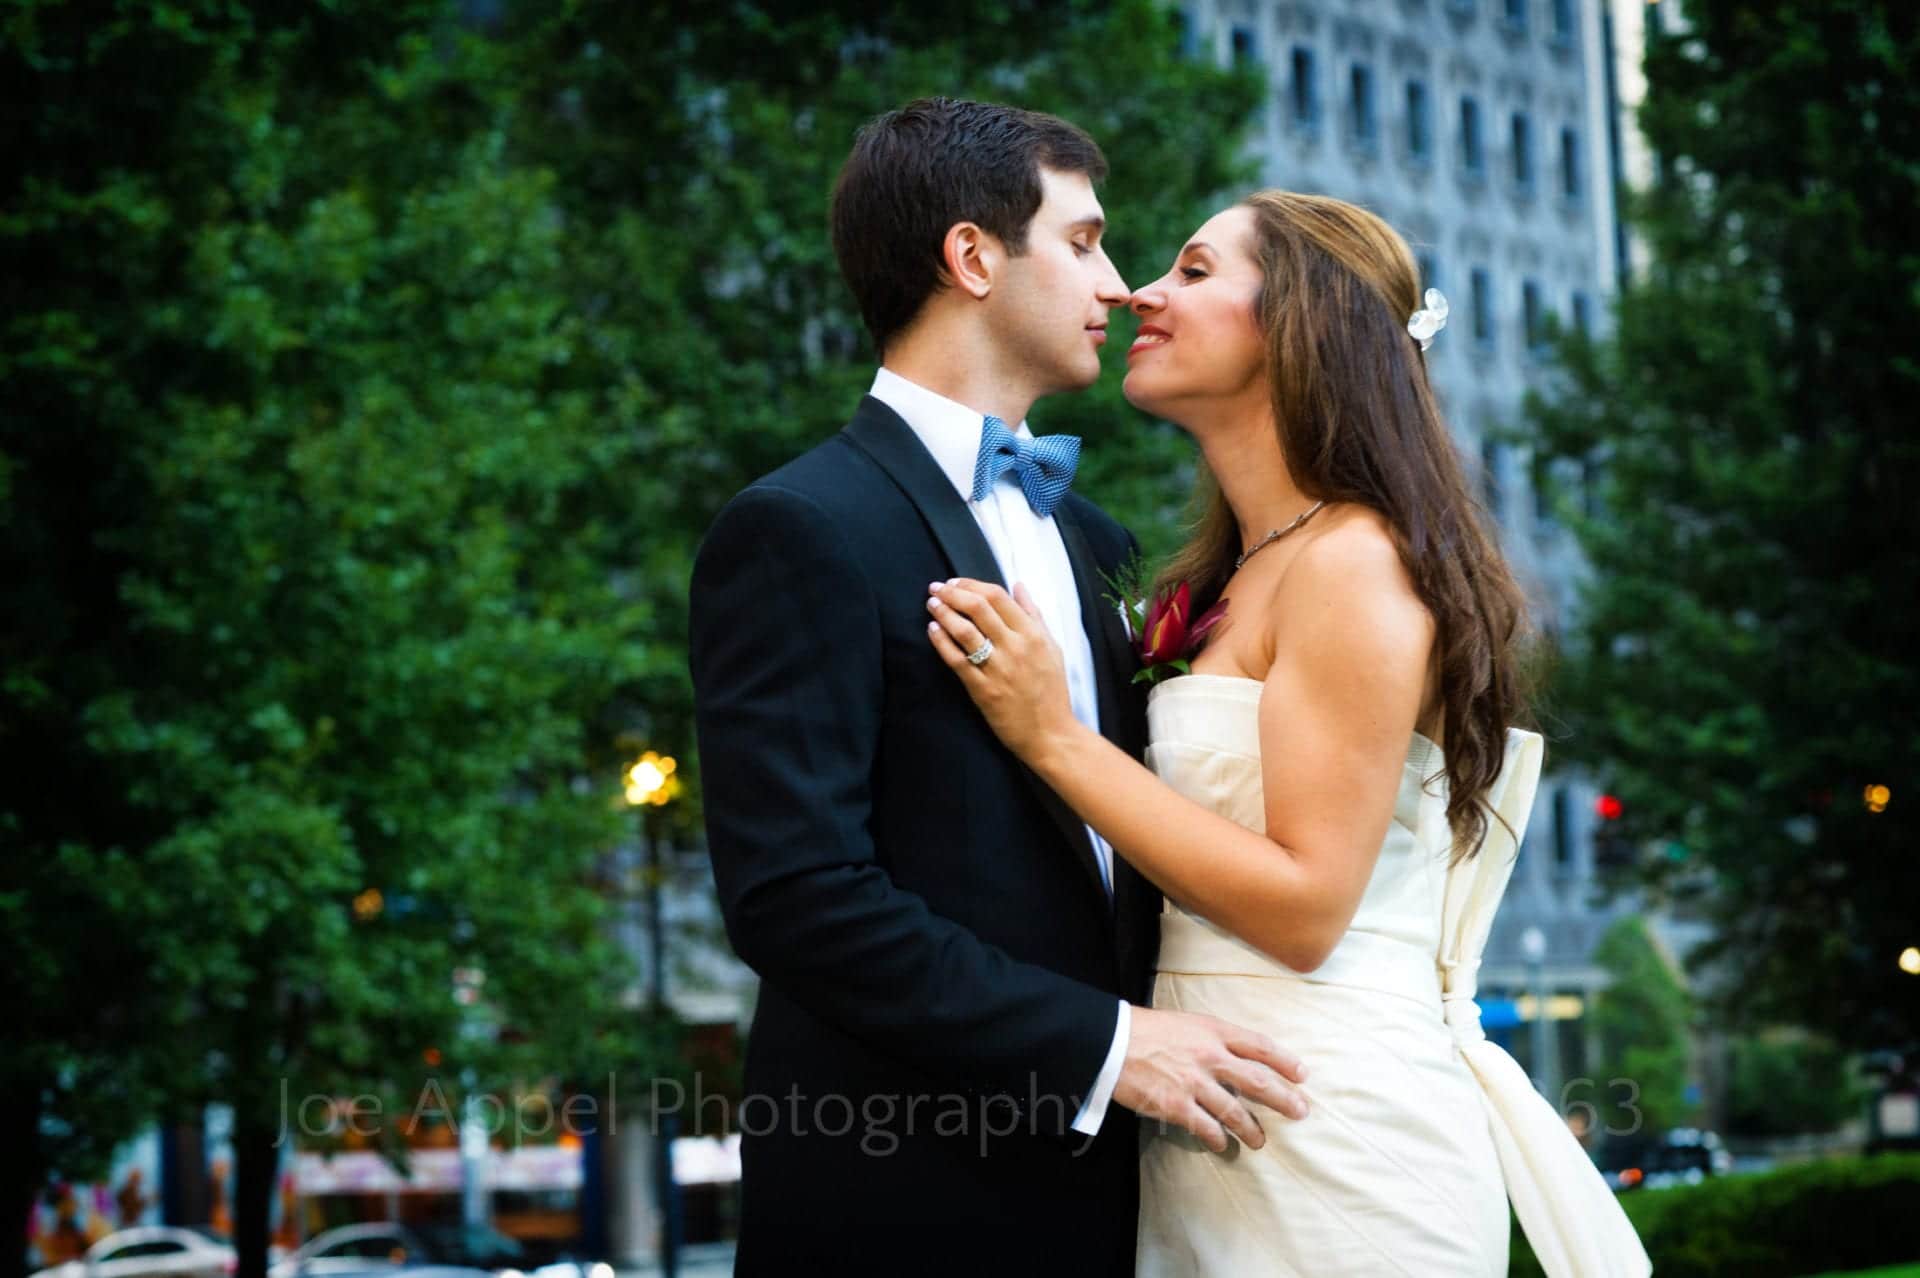 a bride and groom embrace in the city